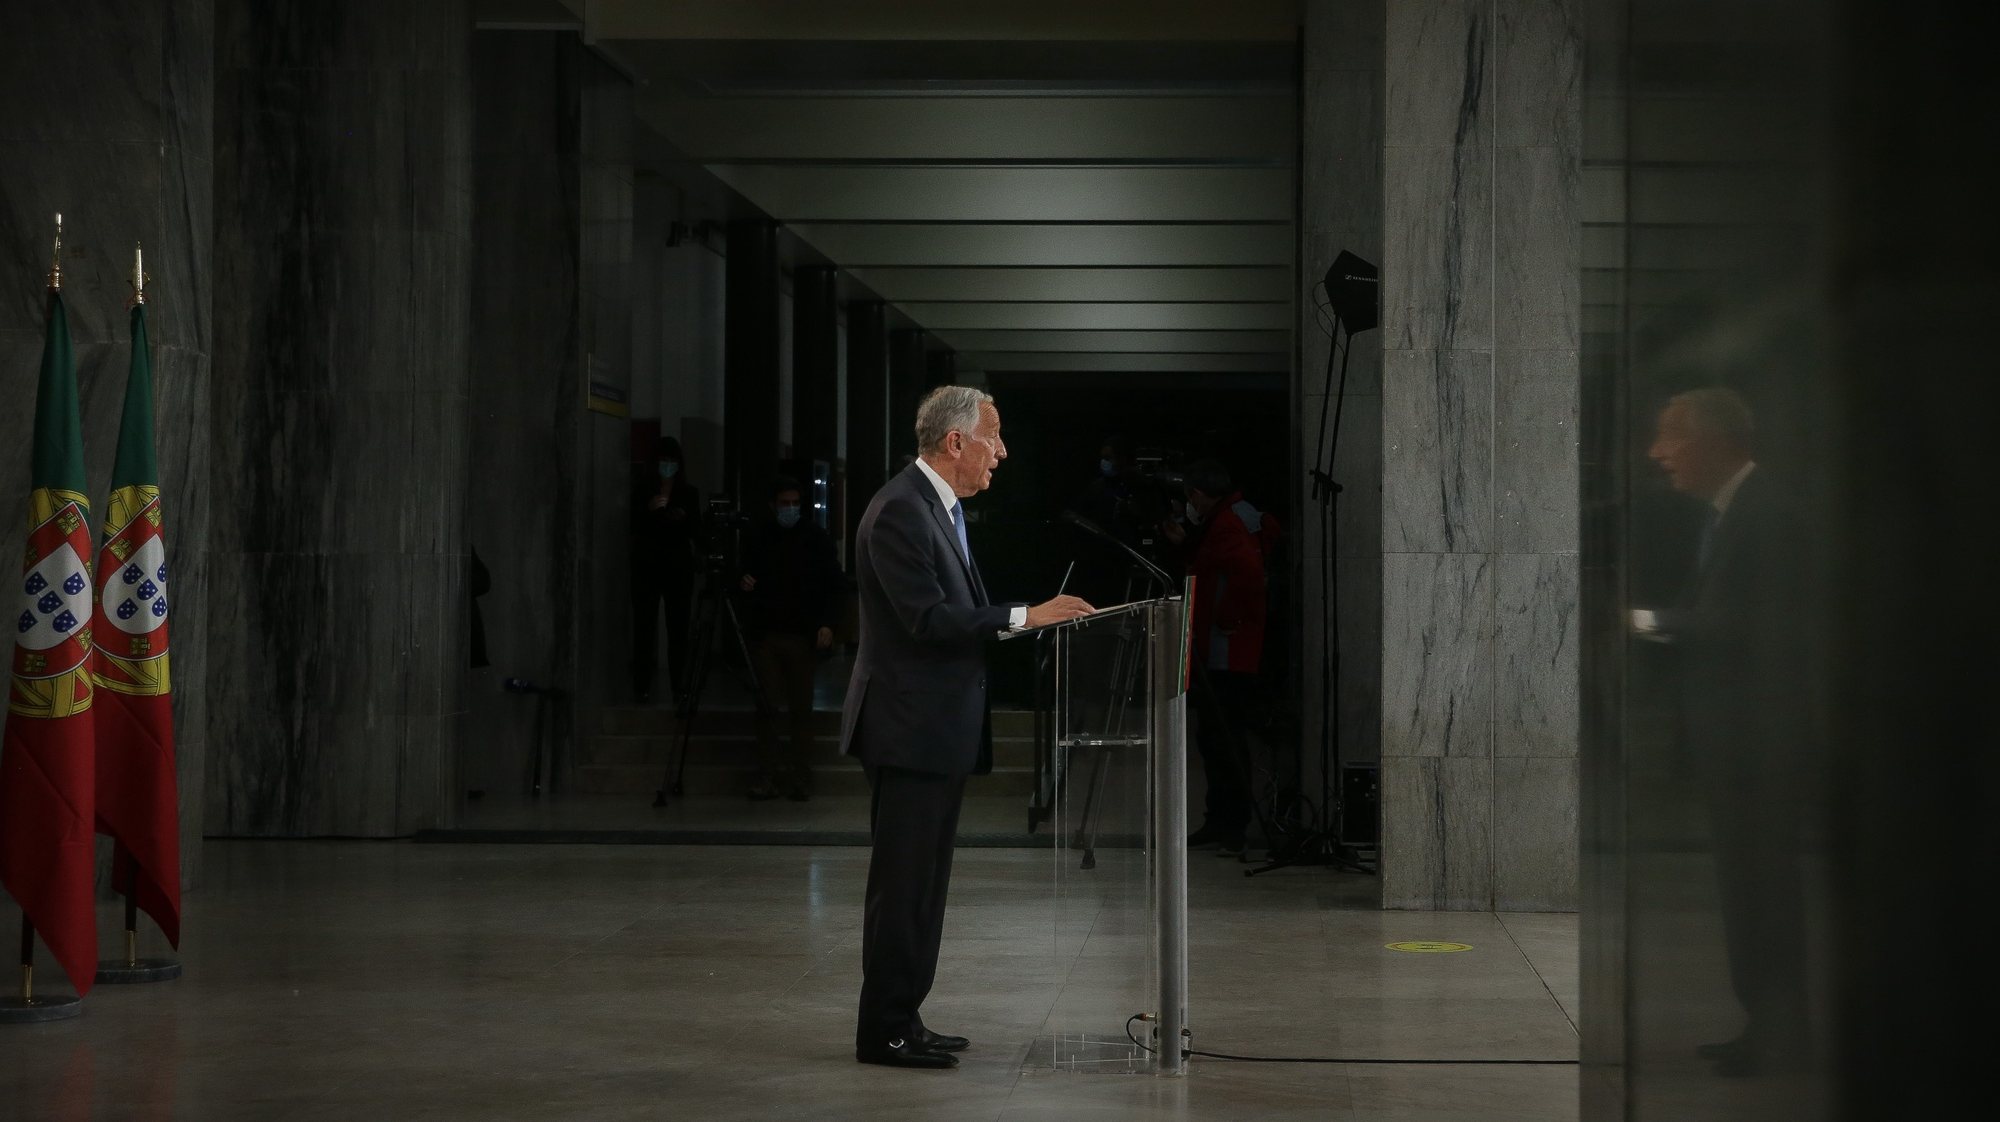 Presidential candidate, Marcelo Rebelo de Sousa, delivers his victory speech for being re-elected as Portugal&#039;s President after winning the 2021 presidential elections, in Lisbon, Portugal, 24 January 2021. Marcelo Rebelo de Sousa won Portugal&#039;s presidential election with a majority of the vote in the first round, according to the election commission. MÁRIO CRUZ/LUSA